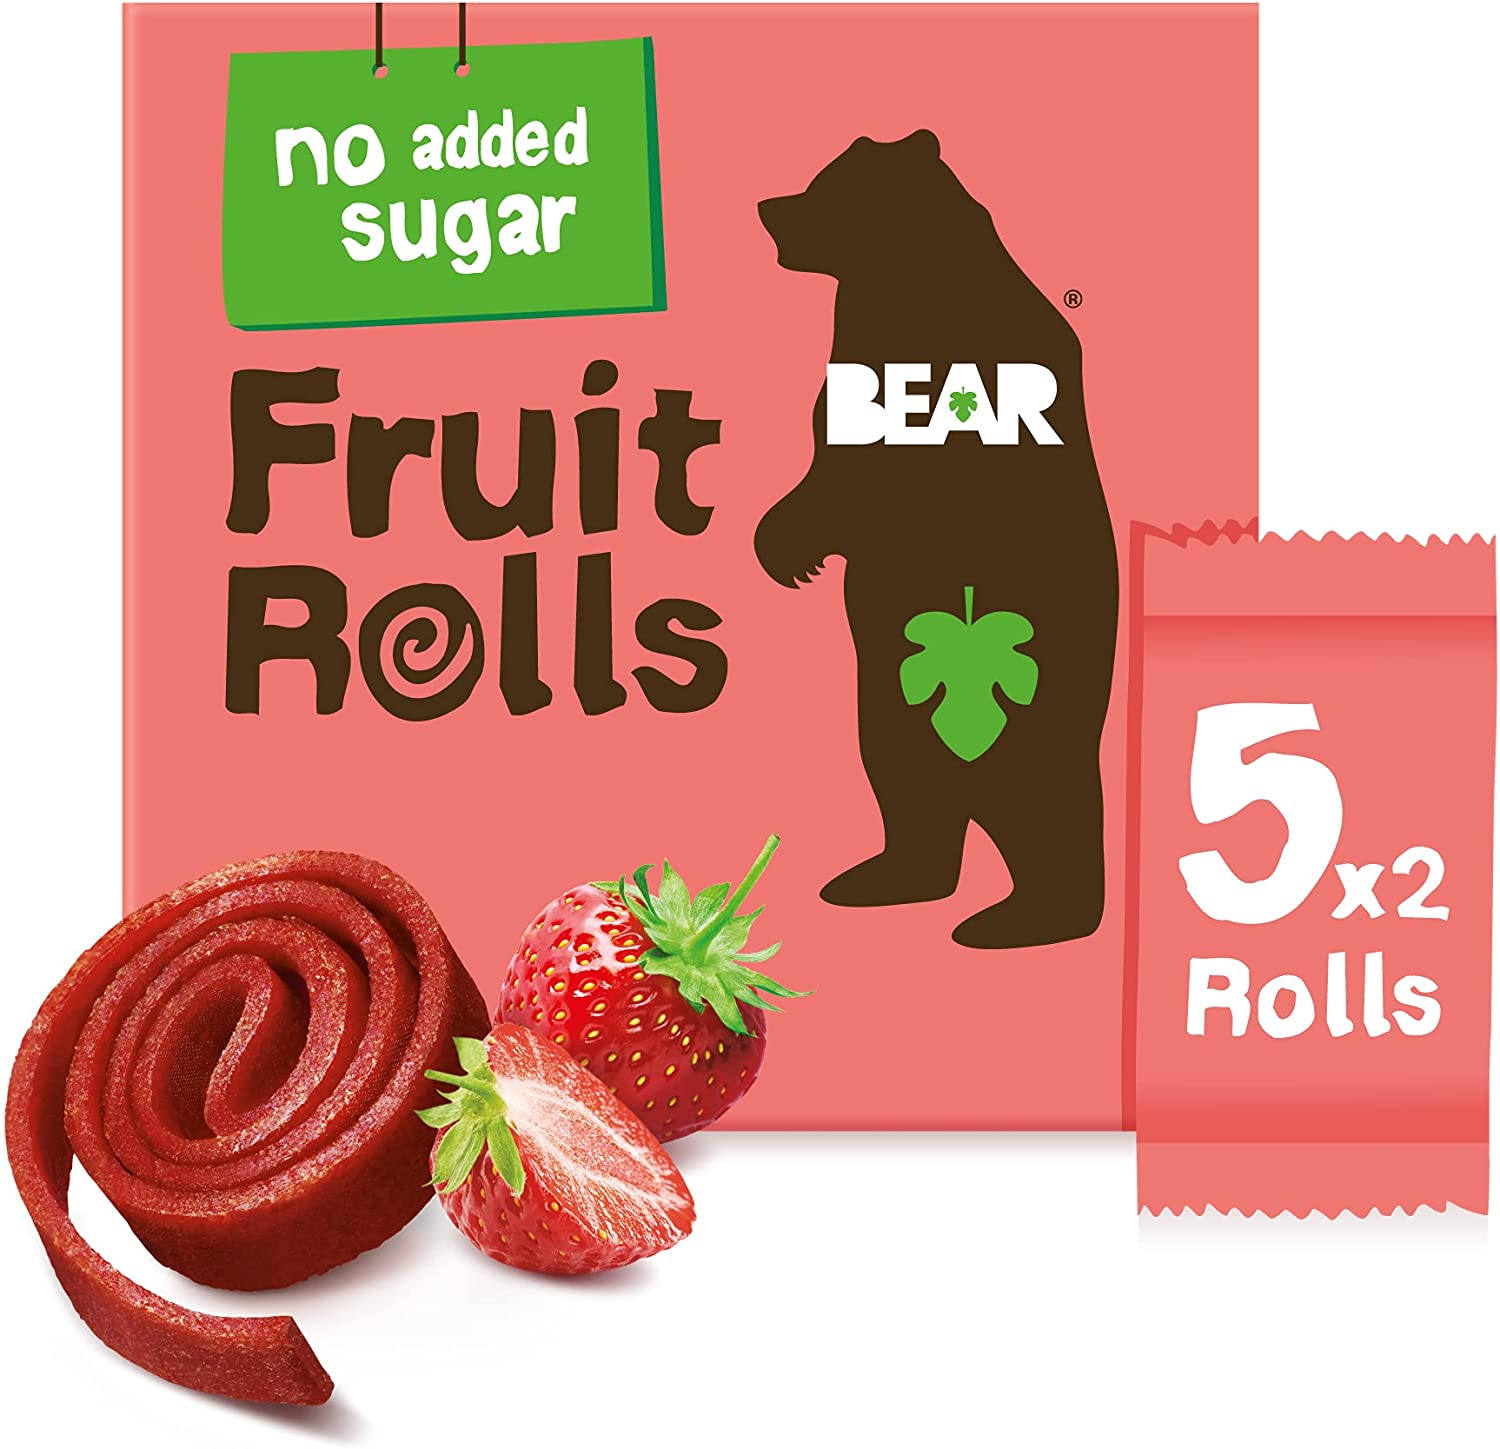 BEAR Real Fruit Yoyos, Strawberry, No added Sugar, All Natural, non GMO, Gluten Free, Vegan – Healthy on-the-go snack for kids & adults, 0.7 Ounce (Pack of 5)